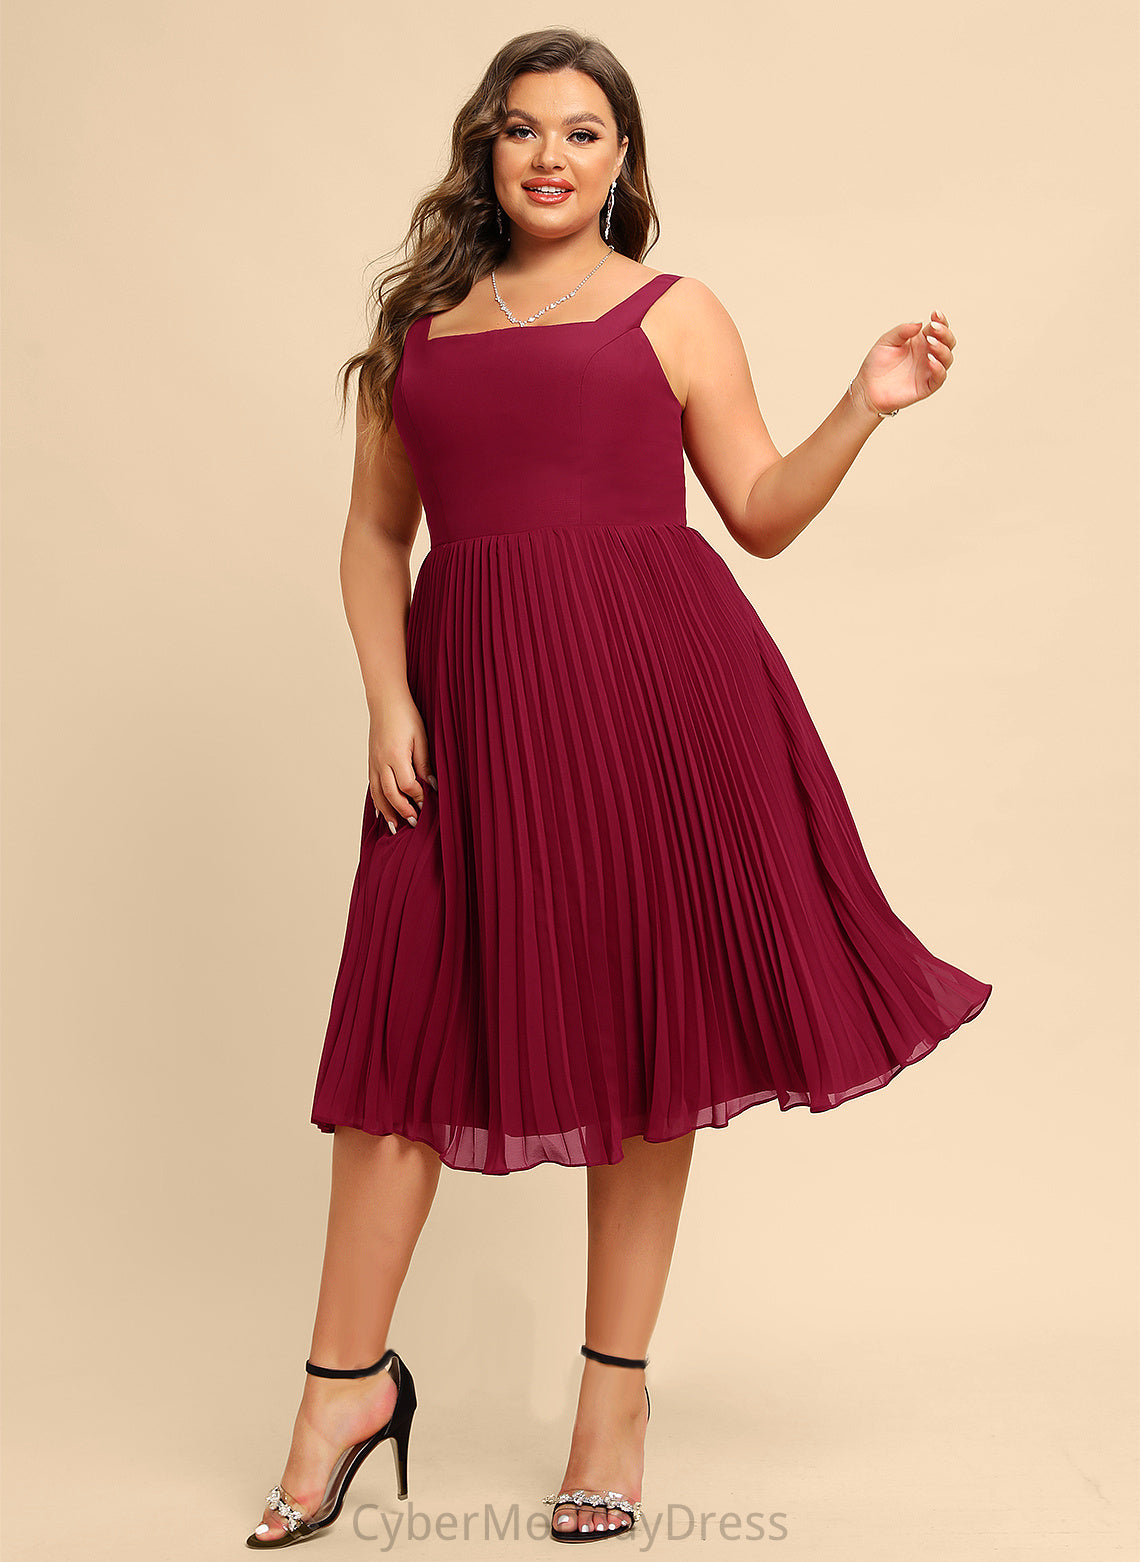 Cocktail Dresses Cocktail Chiffon With Philippa Dress Knee-Length Square Pleated A-Line Neckline